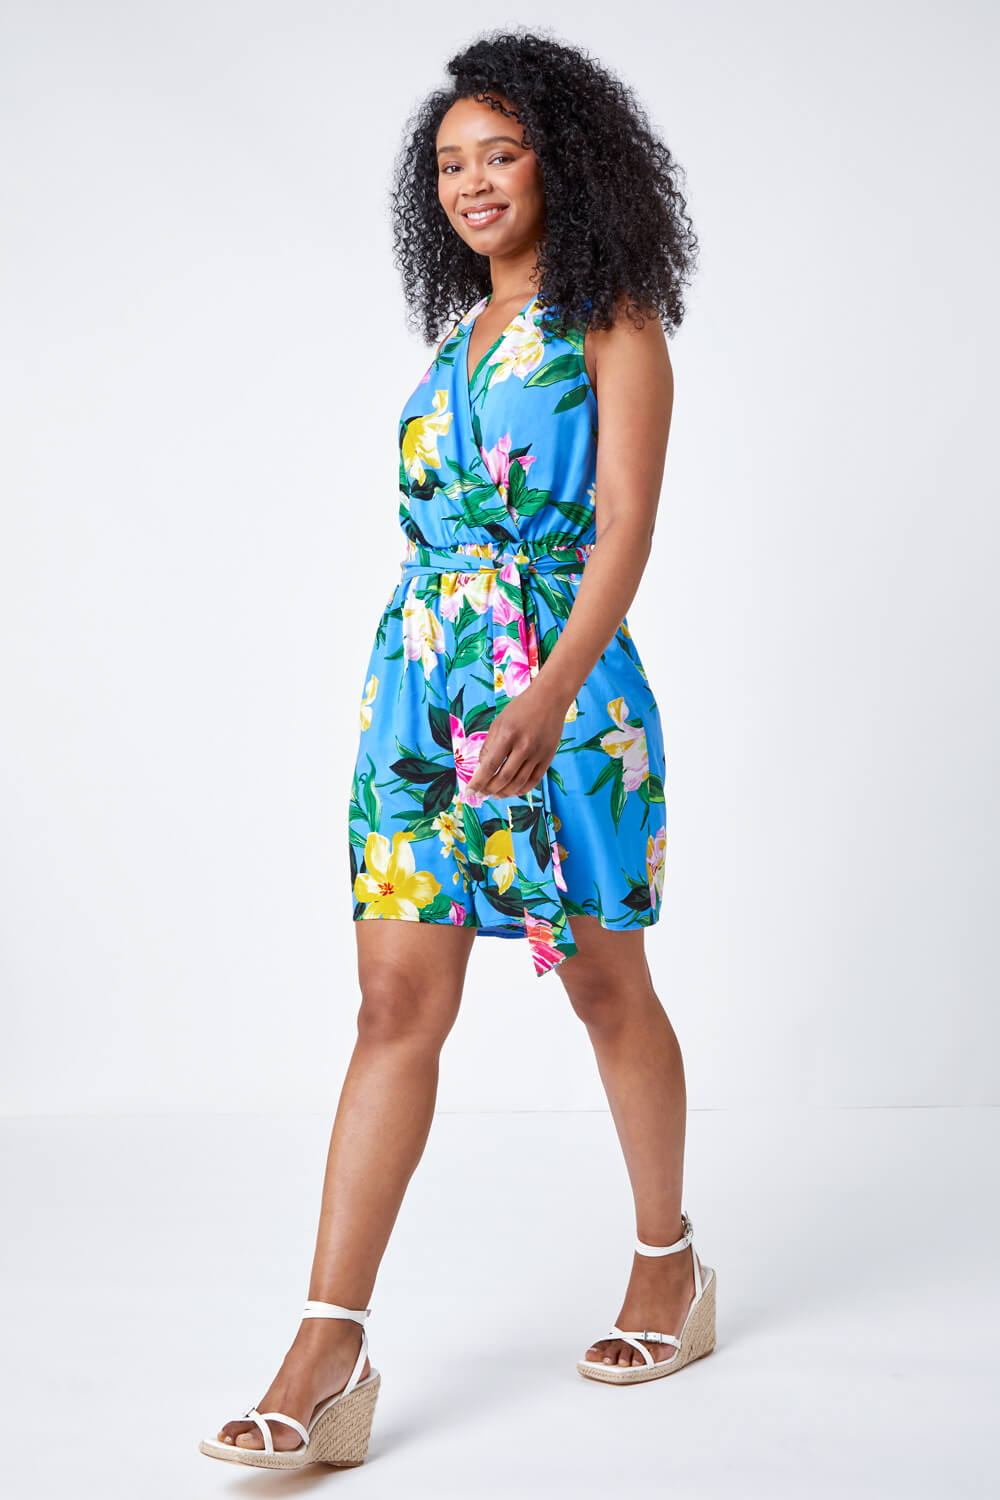 Turquoise Petite Floral Print Stretch Playsuit, Image 4 of 5